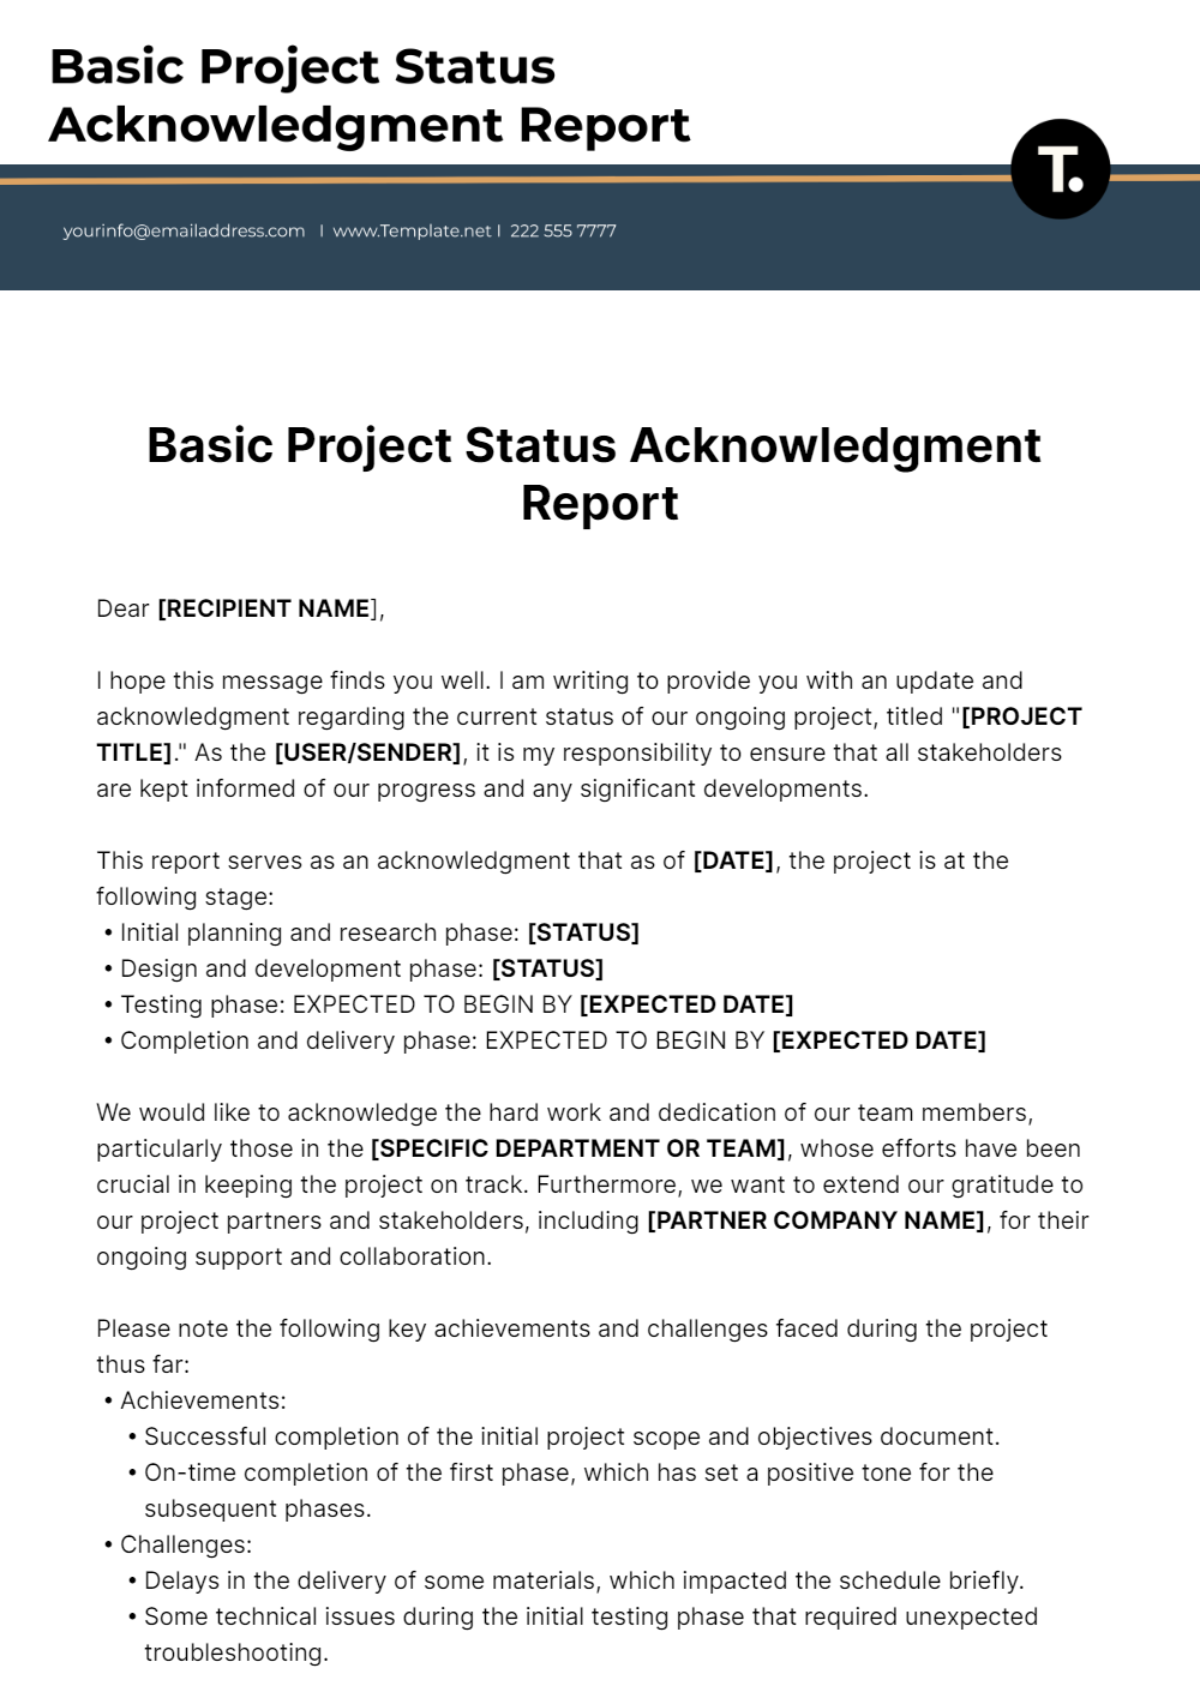 Basic Project Status Acknowledgment Report Template